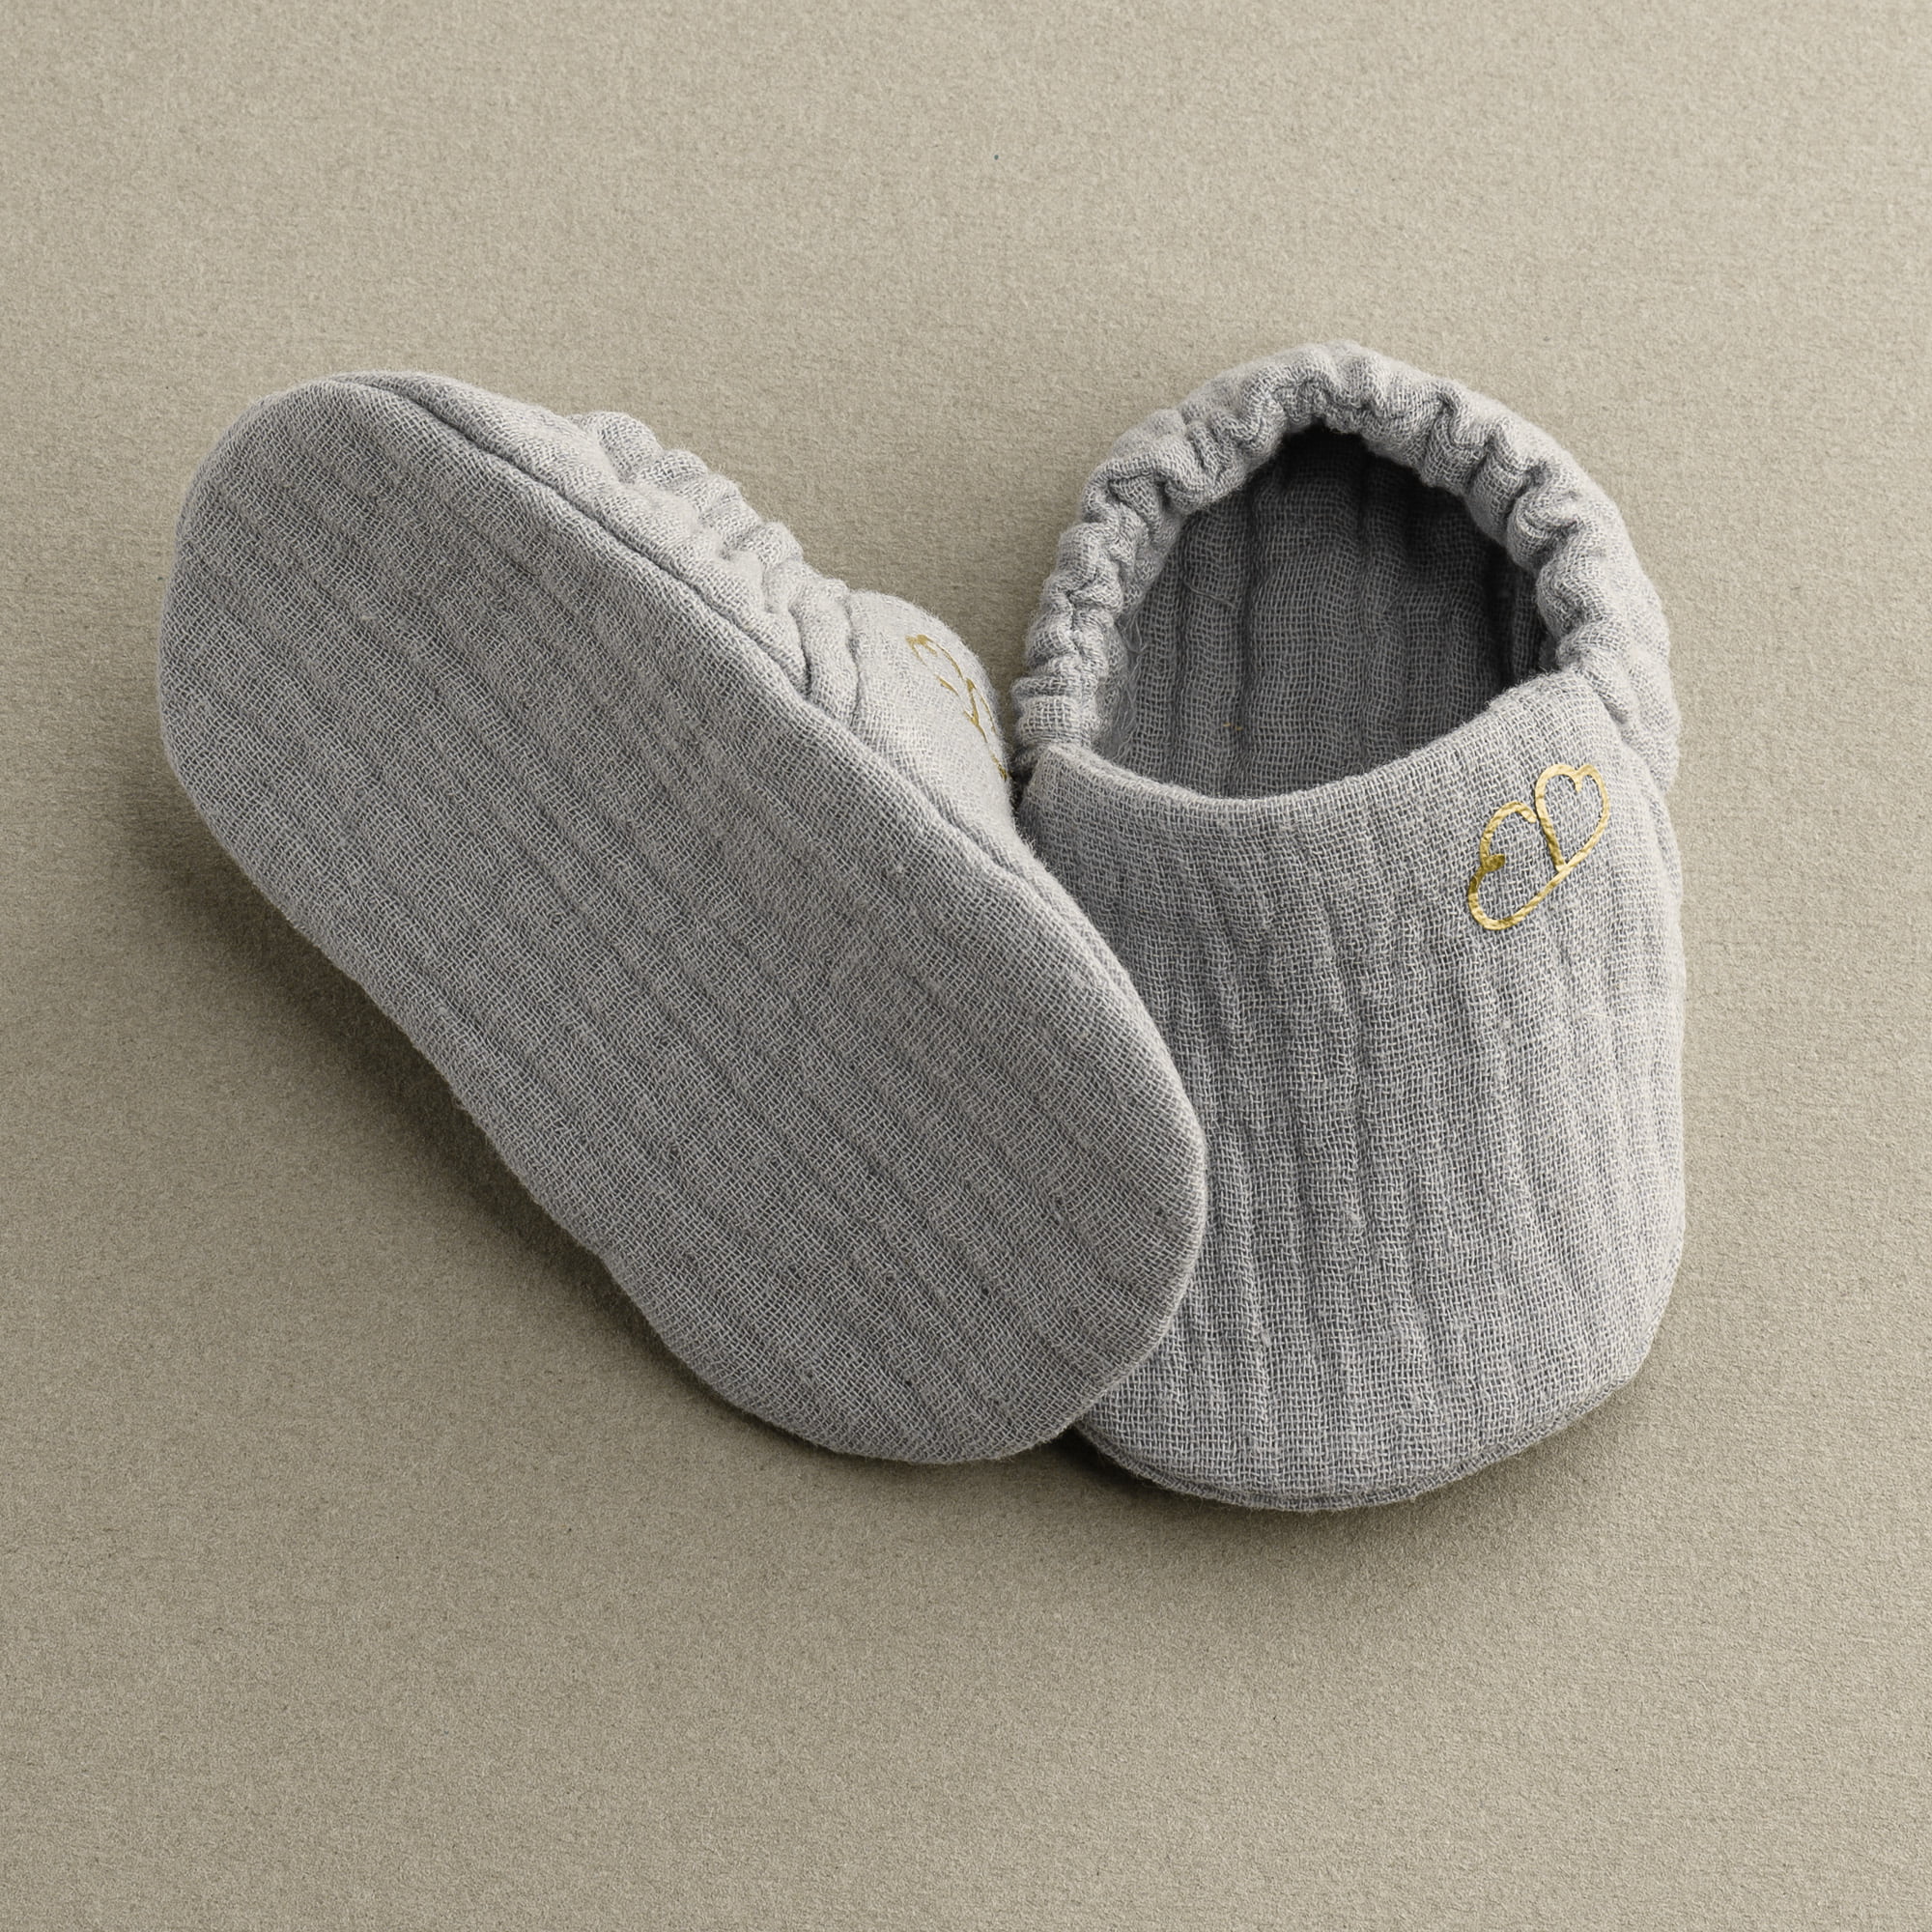 chaussons bebe a rayures avec tige facon chaussettes gris bebe